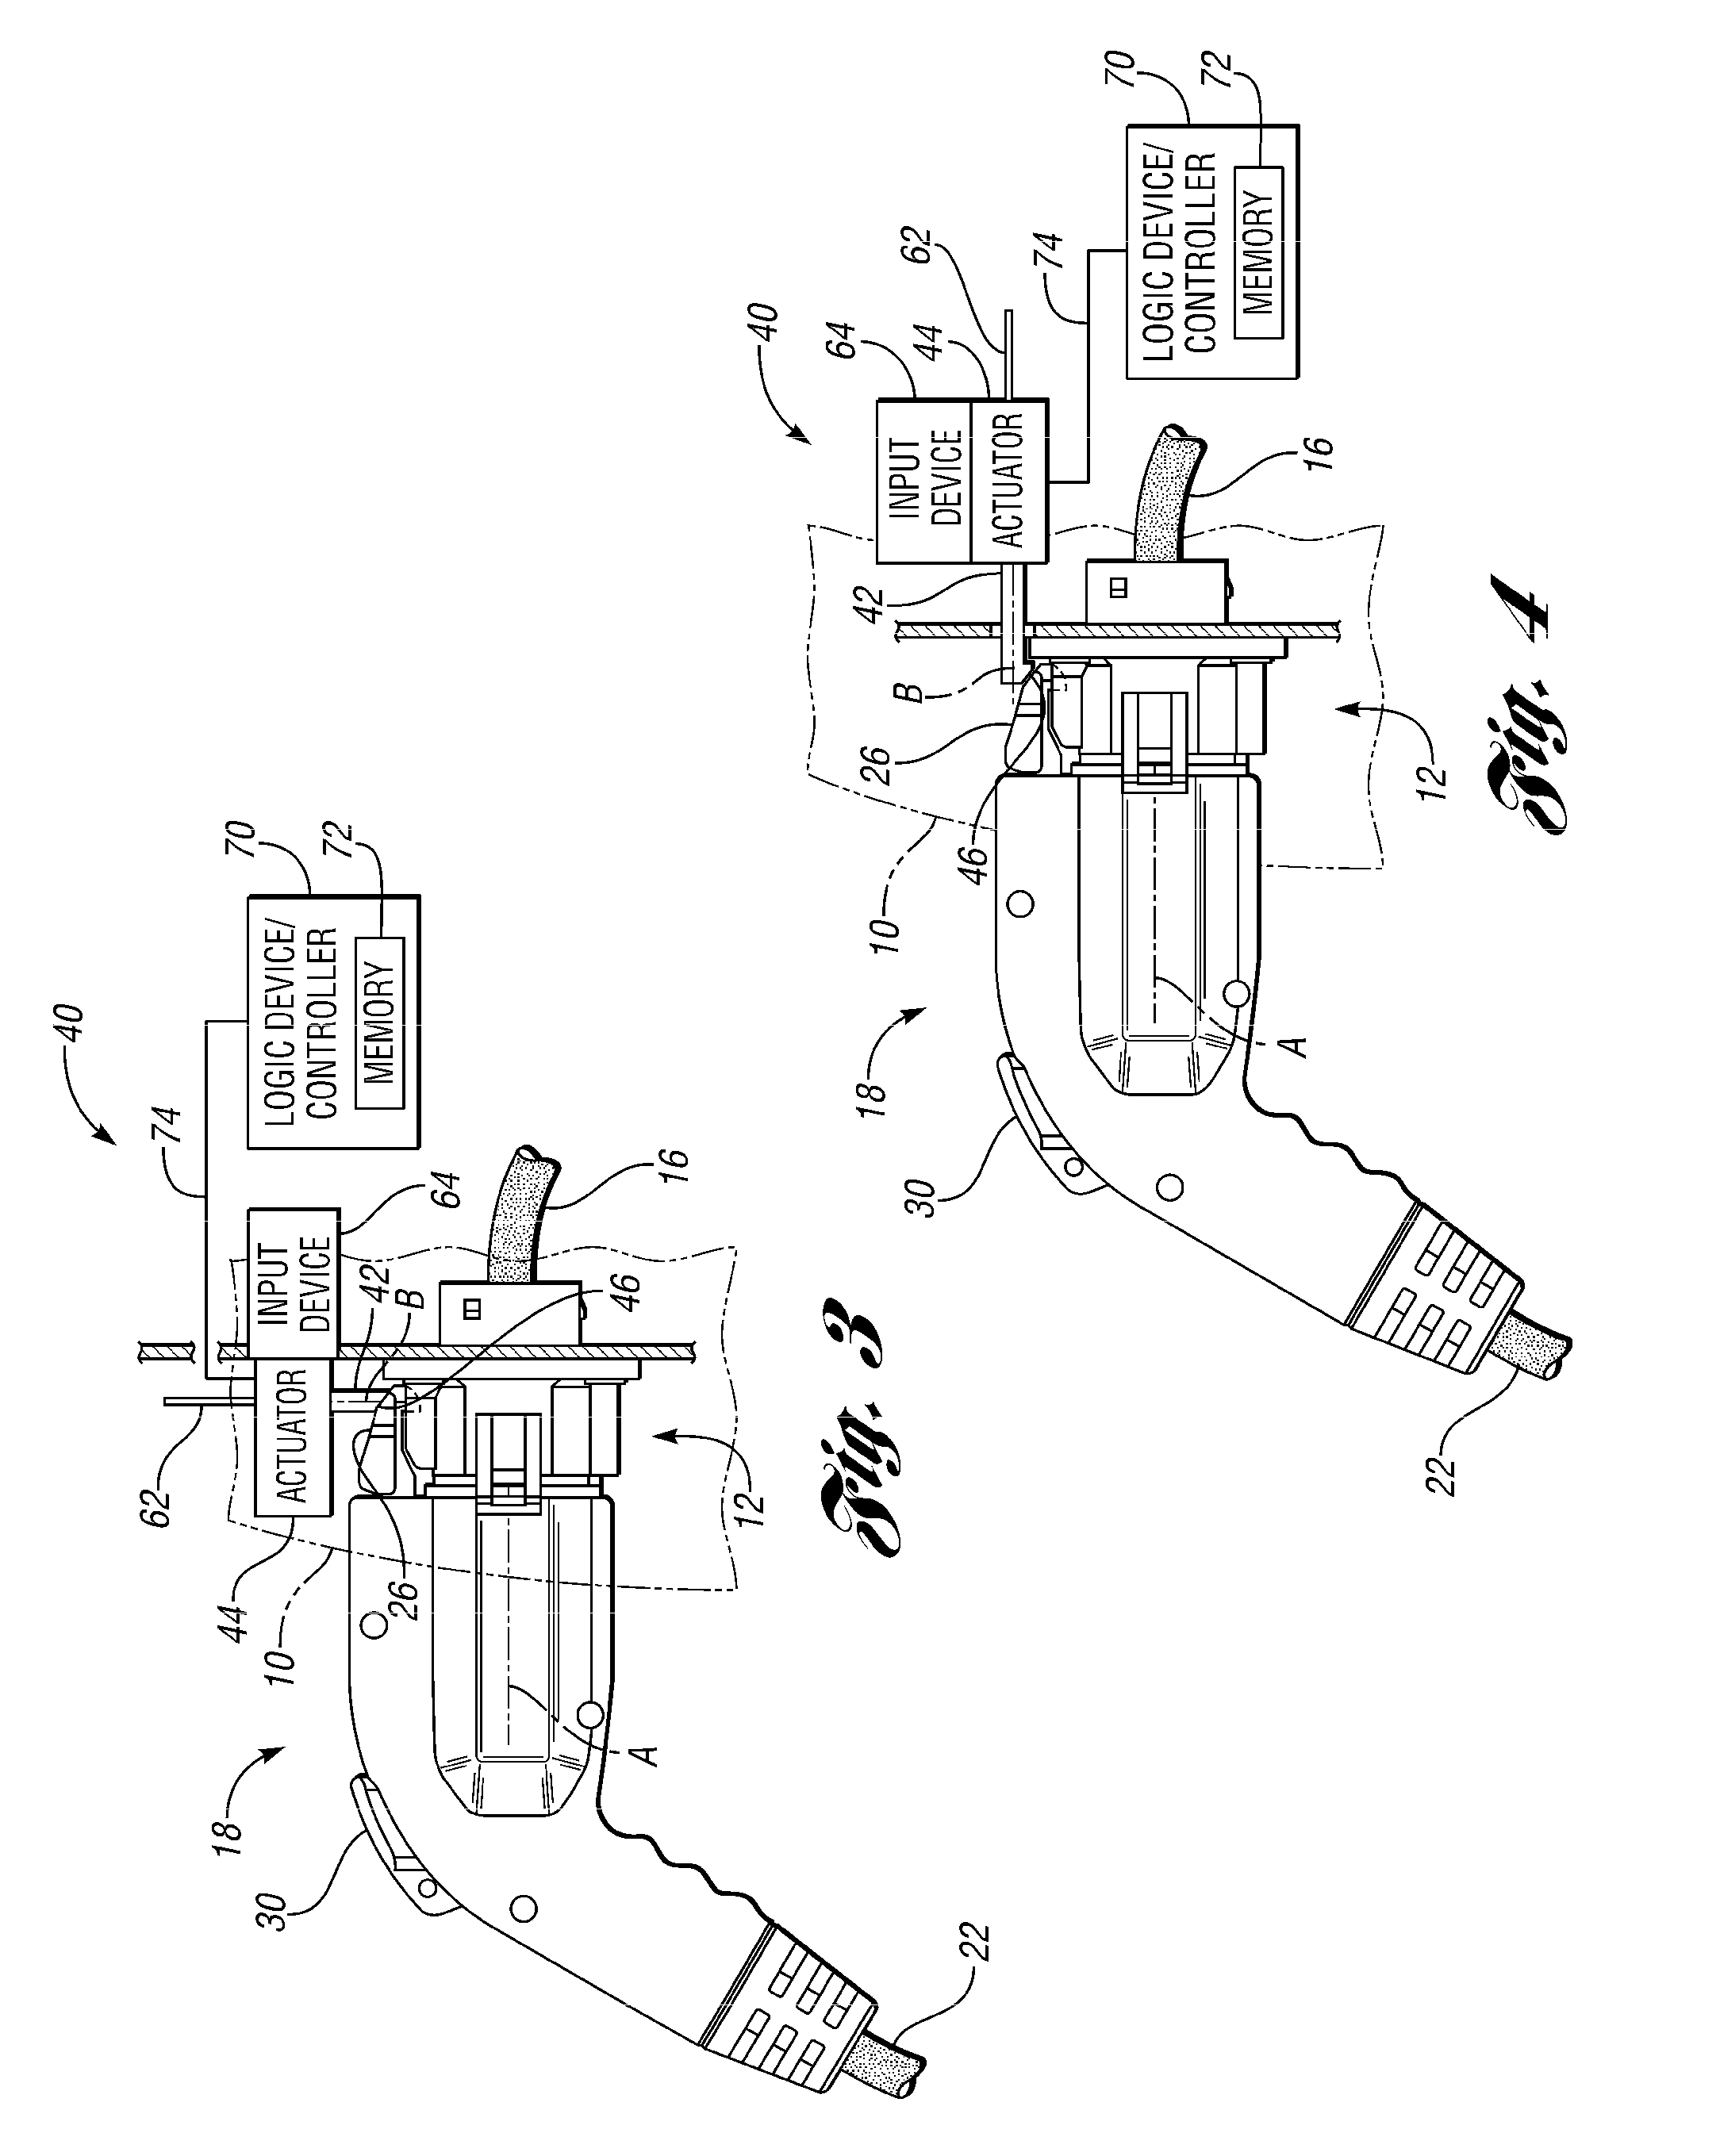 Method and system for preventing disengagement between an electrical plug and a charge port on an electric vehicle